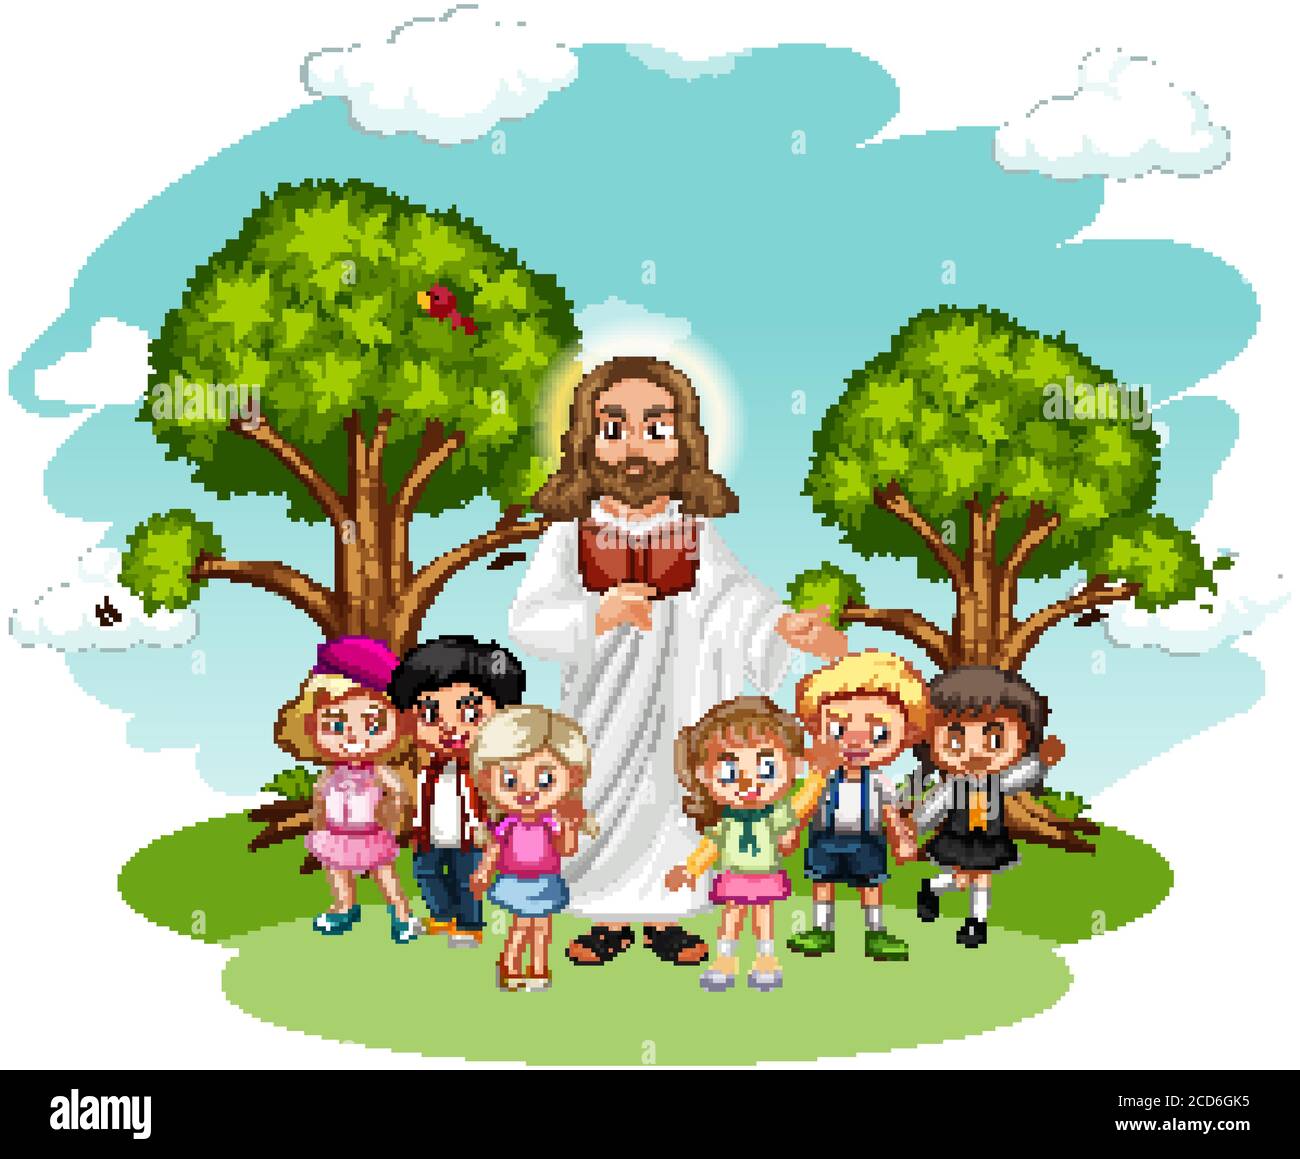 Jesus preaching to a children group cartoon character illustration ...